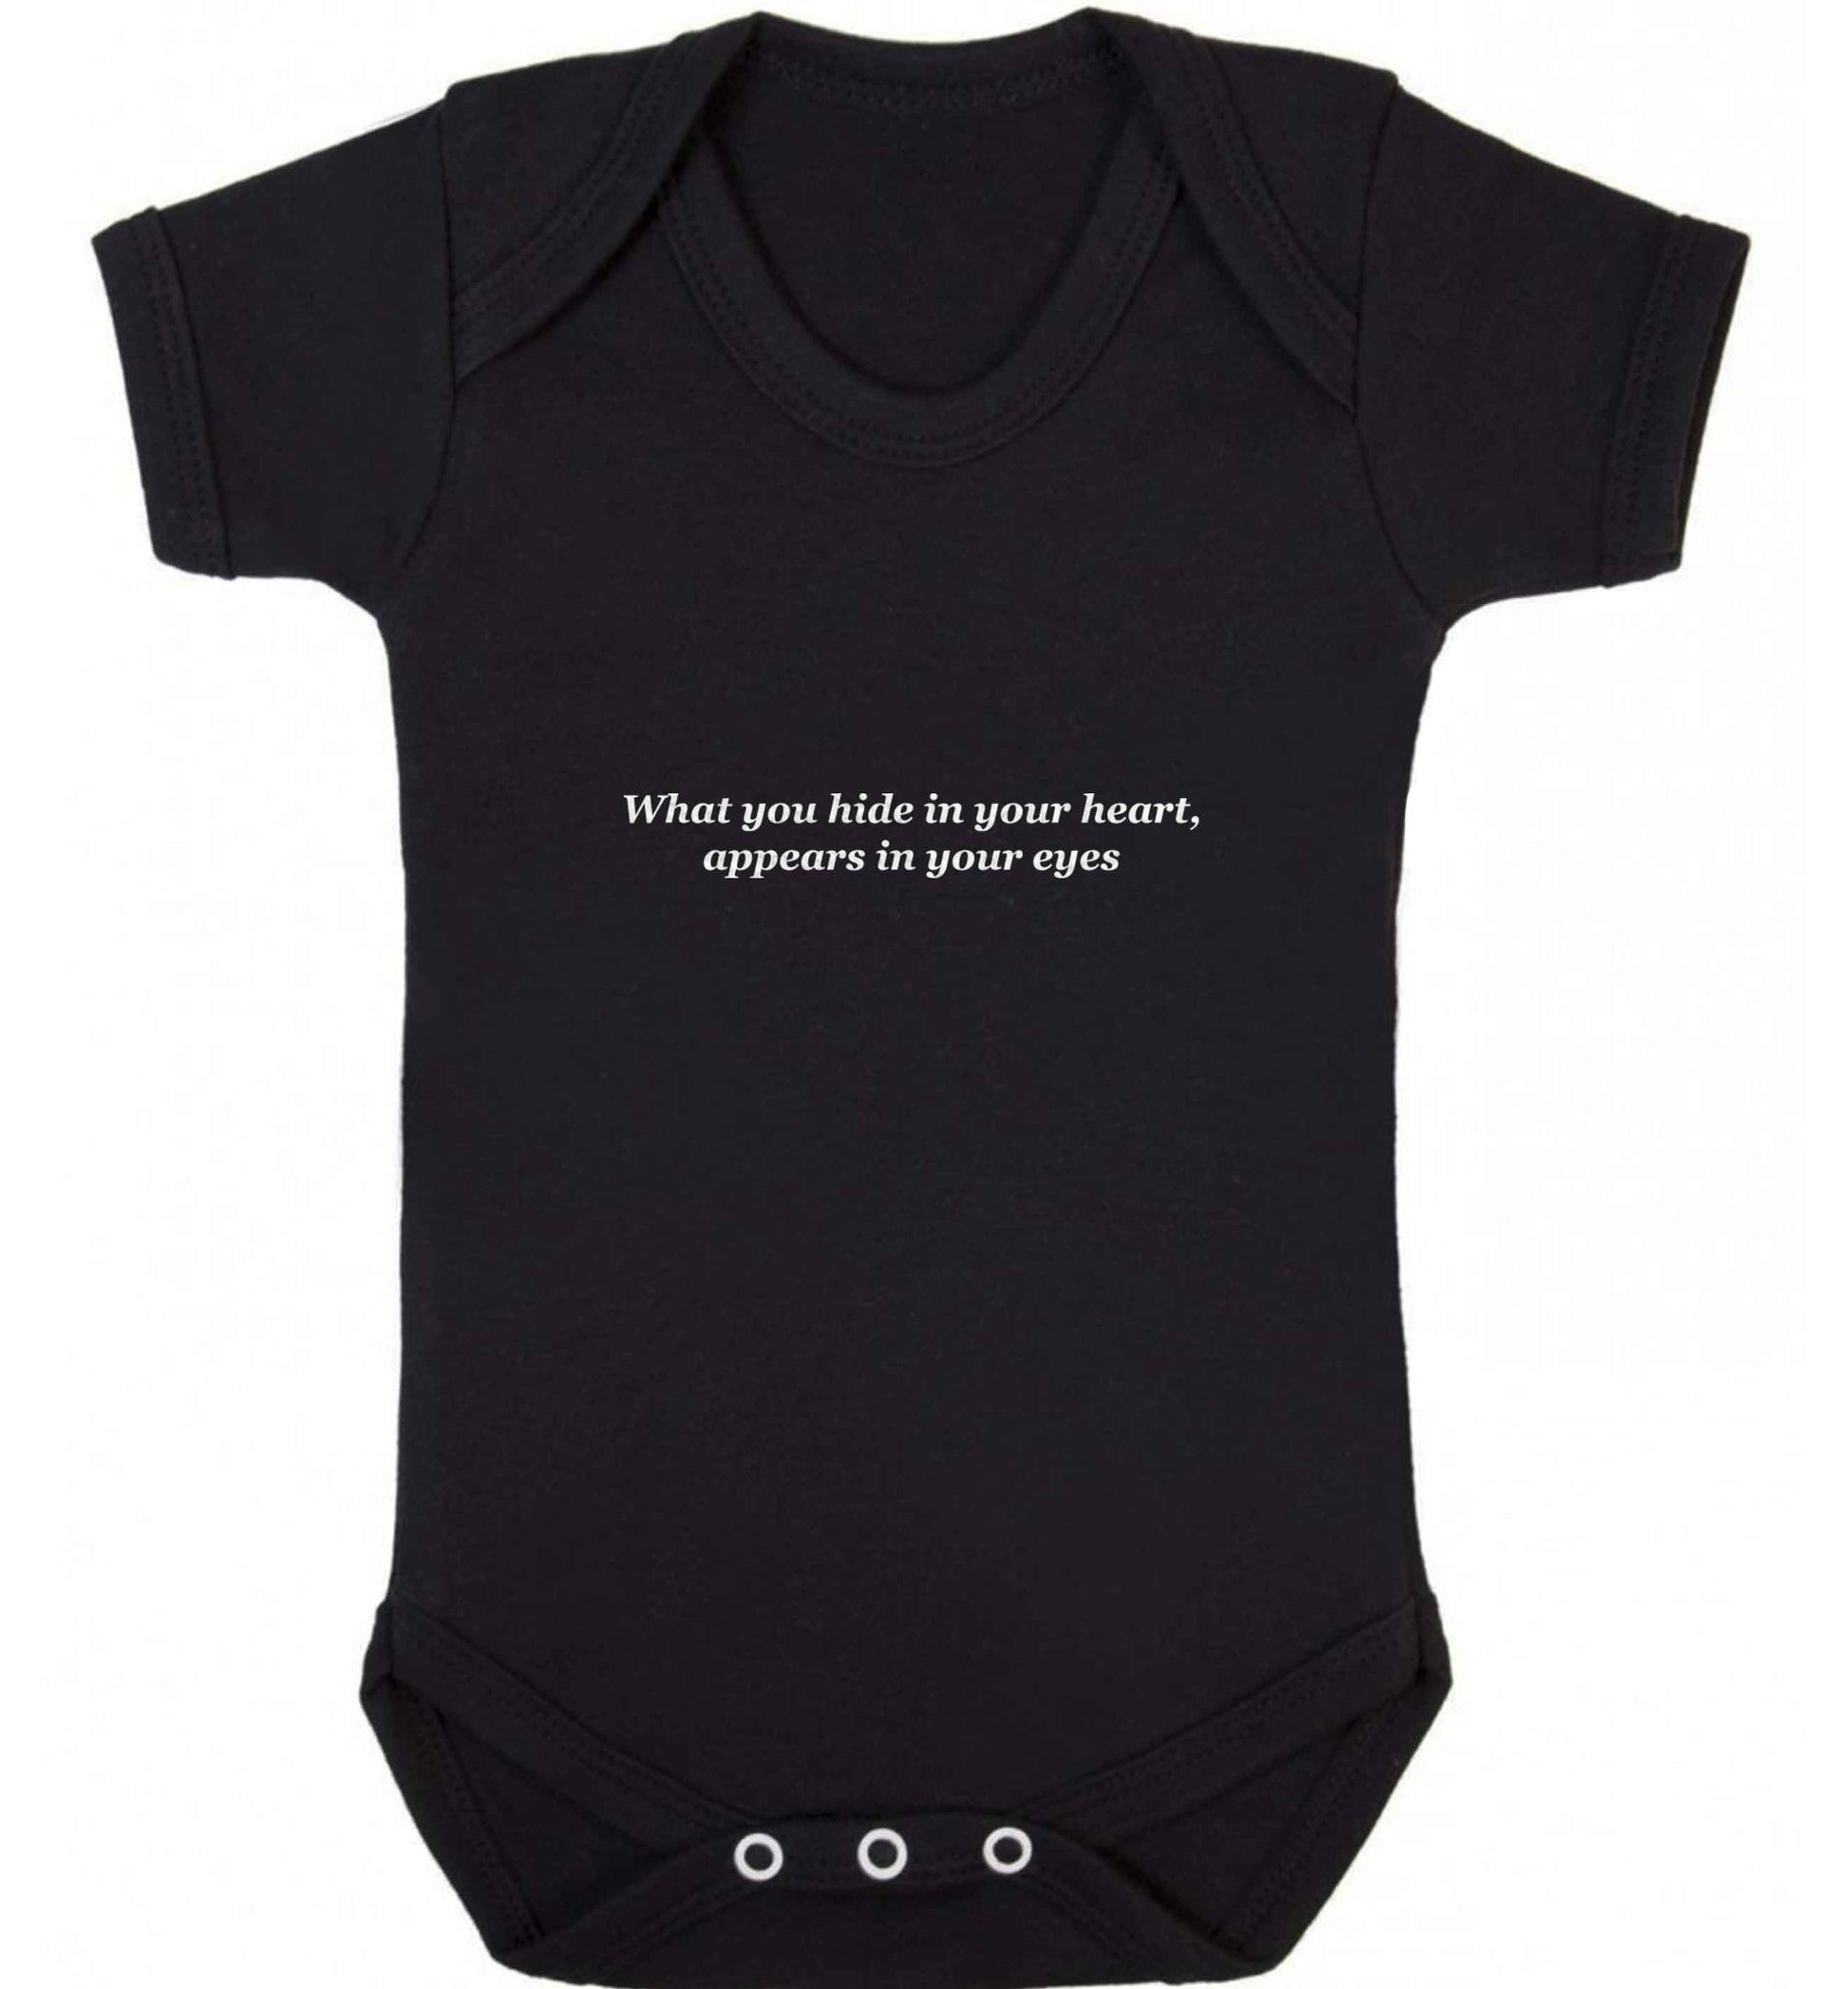 What you hide in your heart, appears in your eyes baby vest black 18-24 months